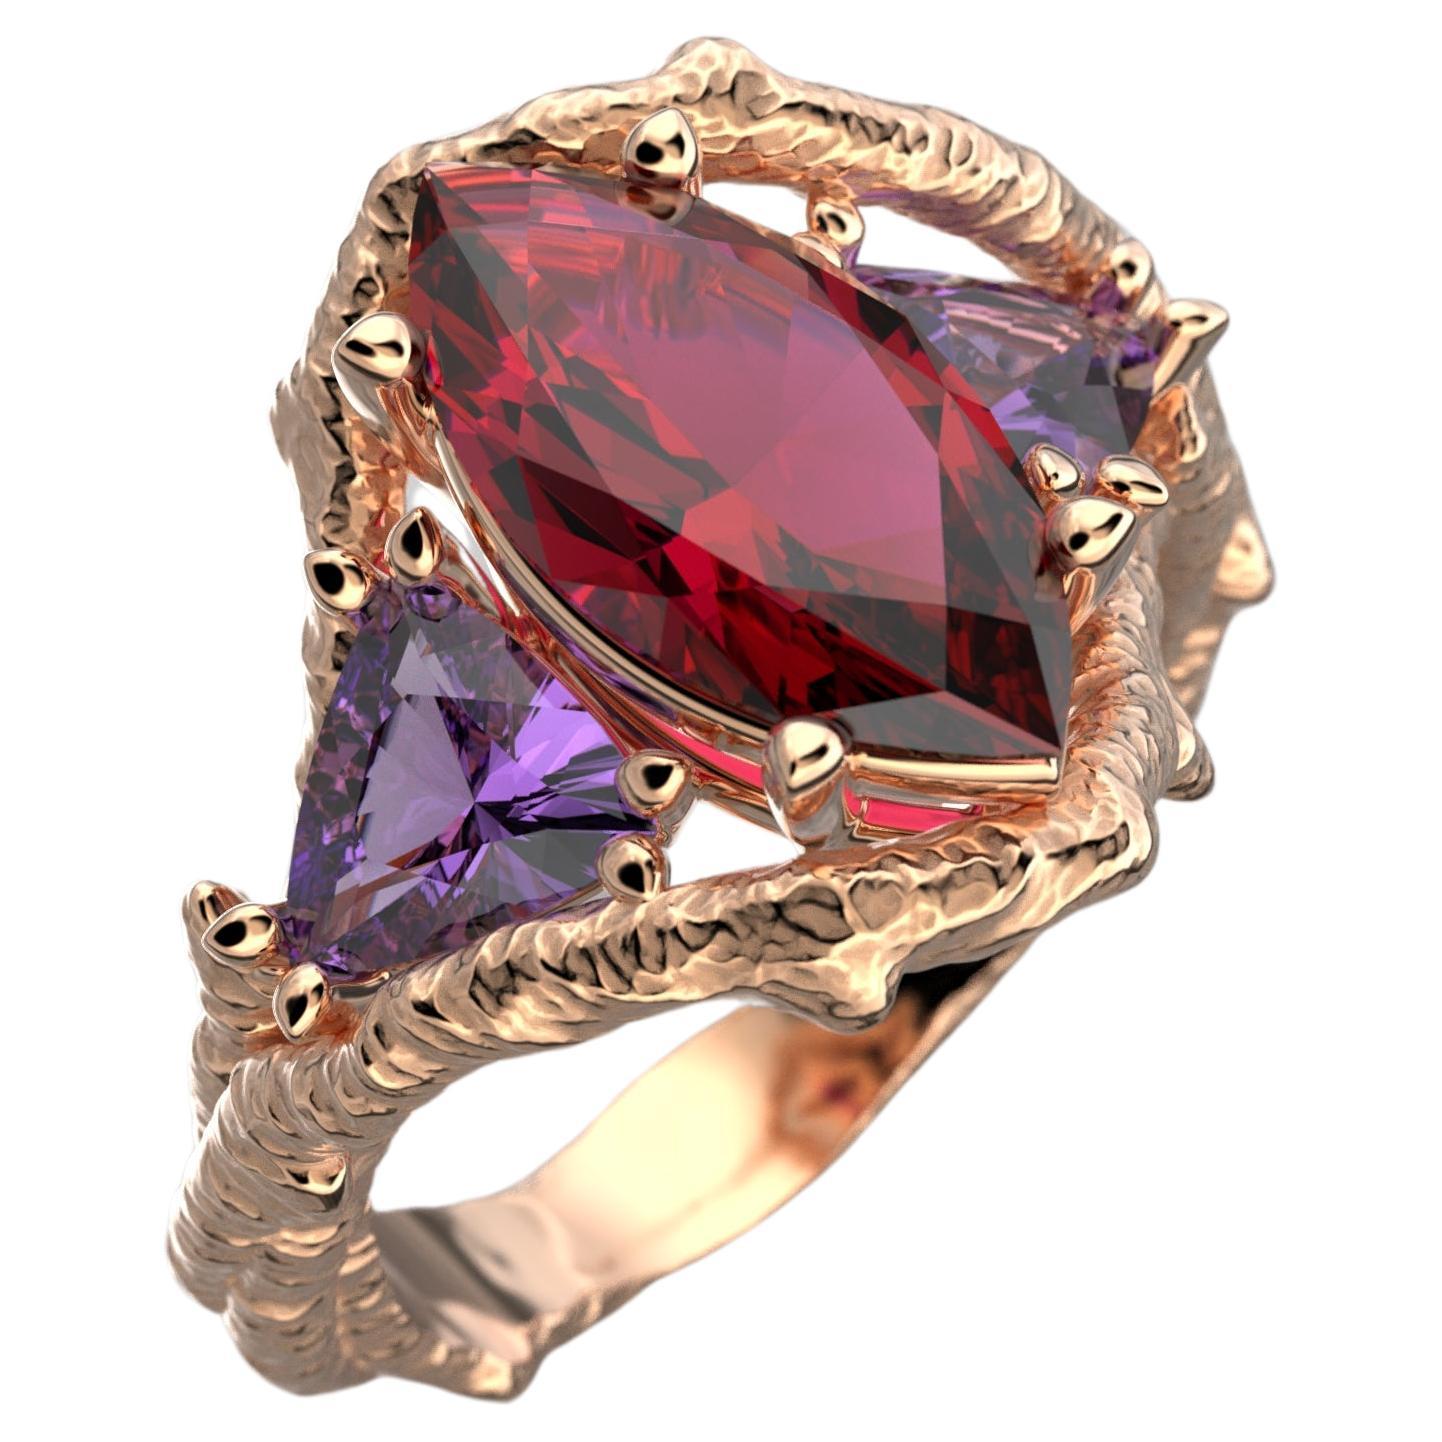 Nature Inspired 18k Solid Gold Gemstone Ring Made in Italy by Oltremare Gioielli